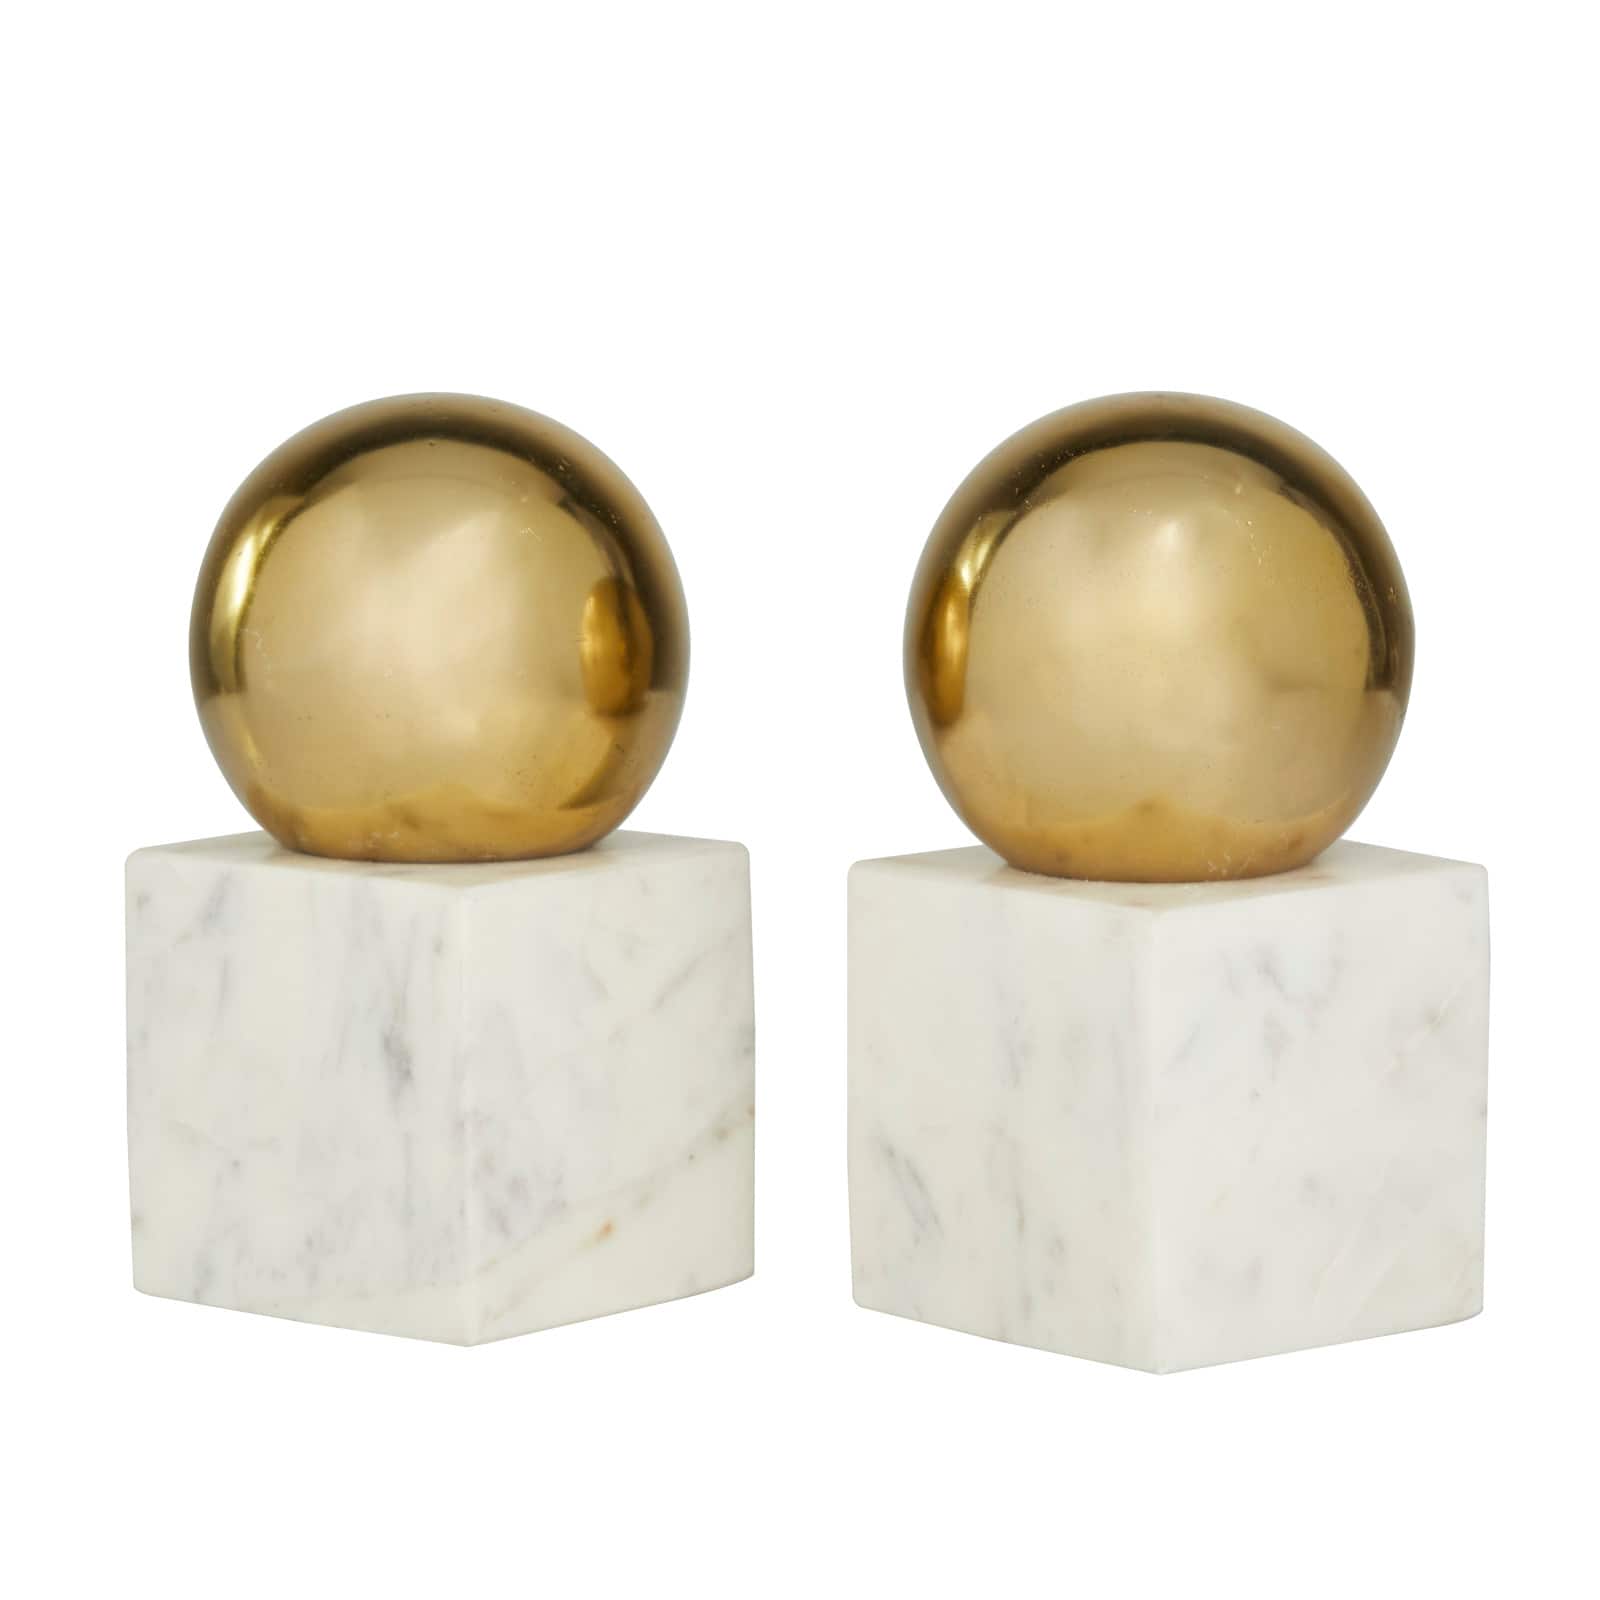 CosmoLiving by Cosmopolitan 7" Marble Orb Bookend Set